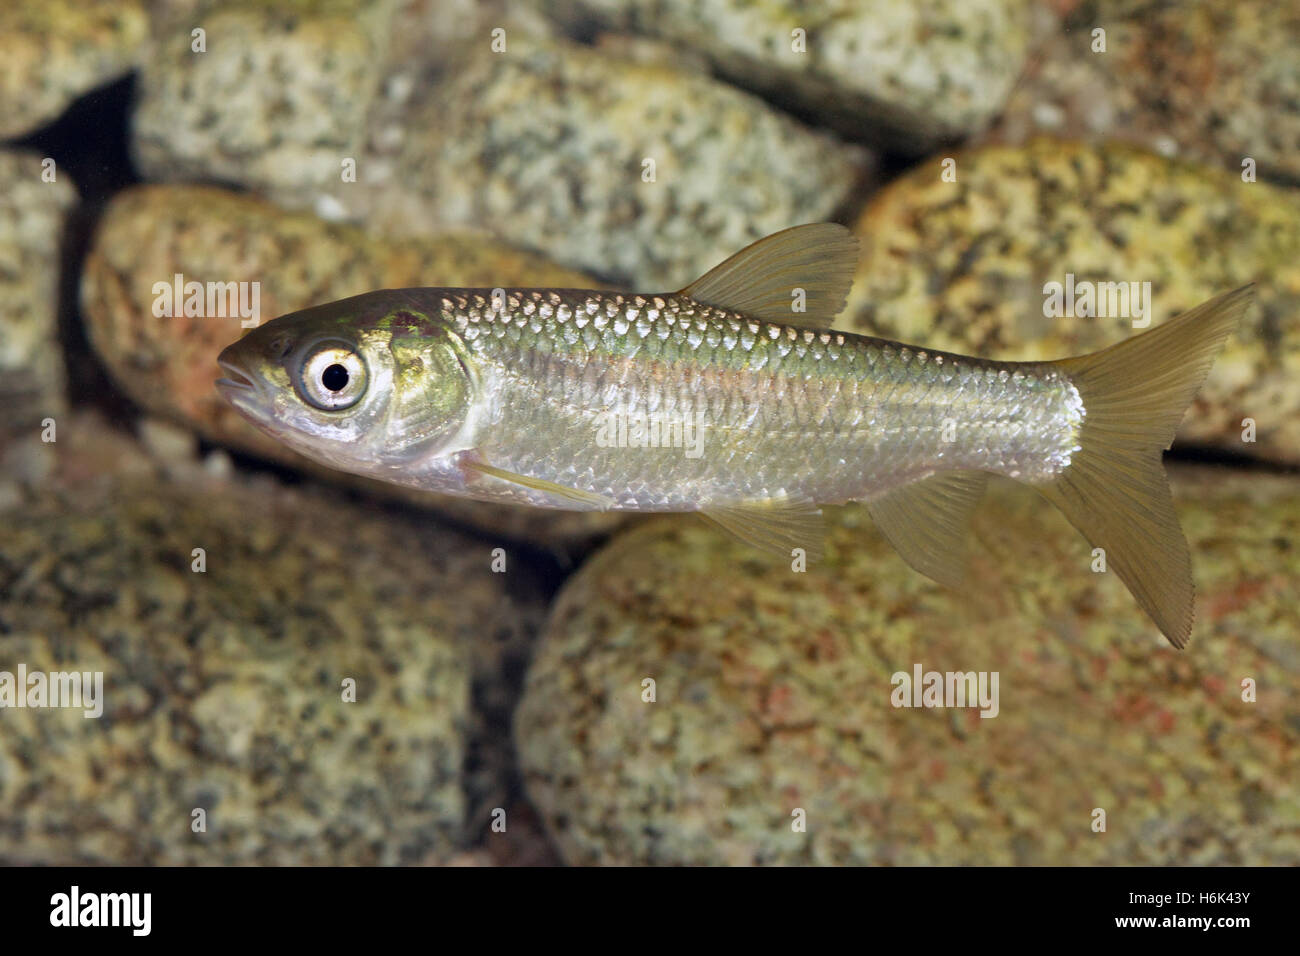 Squalius cephalus is a European species of freshwater fish in the carp family Cyprinidae. It frequents both slow and moderate rivers. Stock Photo